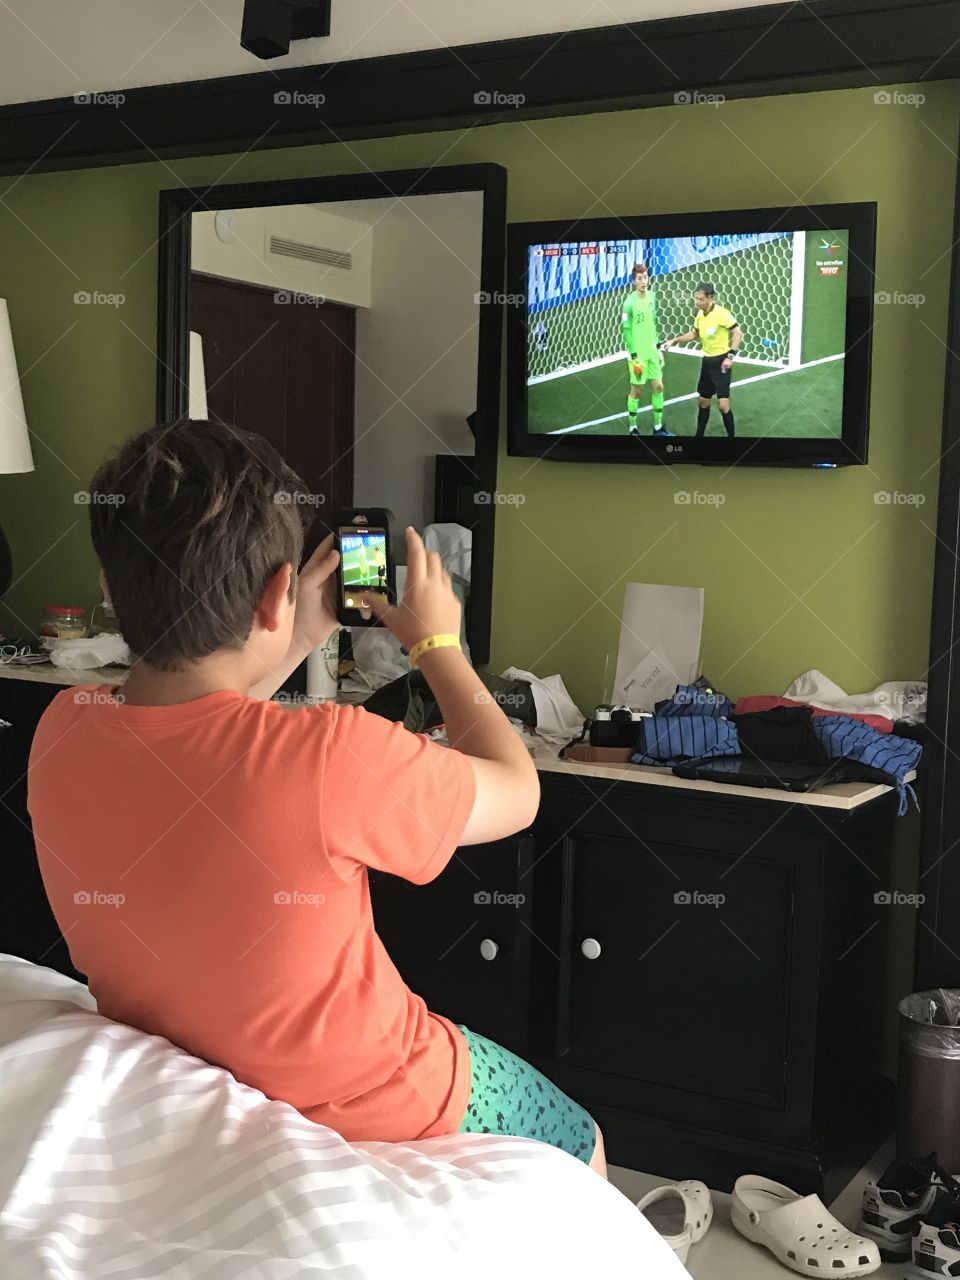 Hotel room tv soccer world cup moment